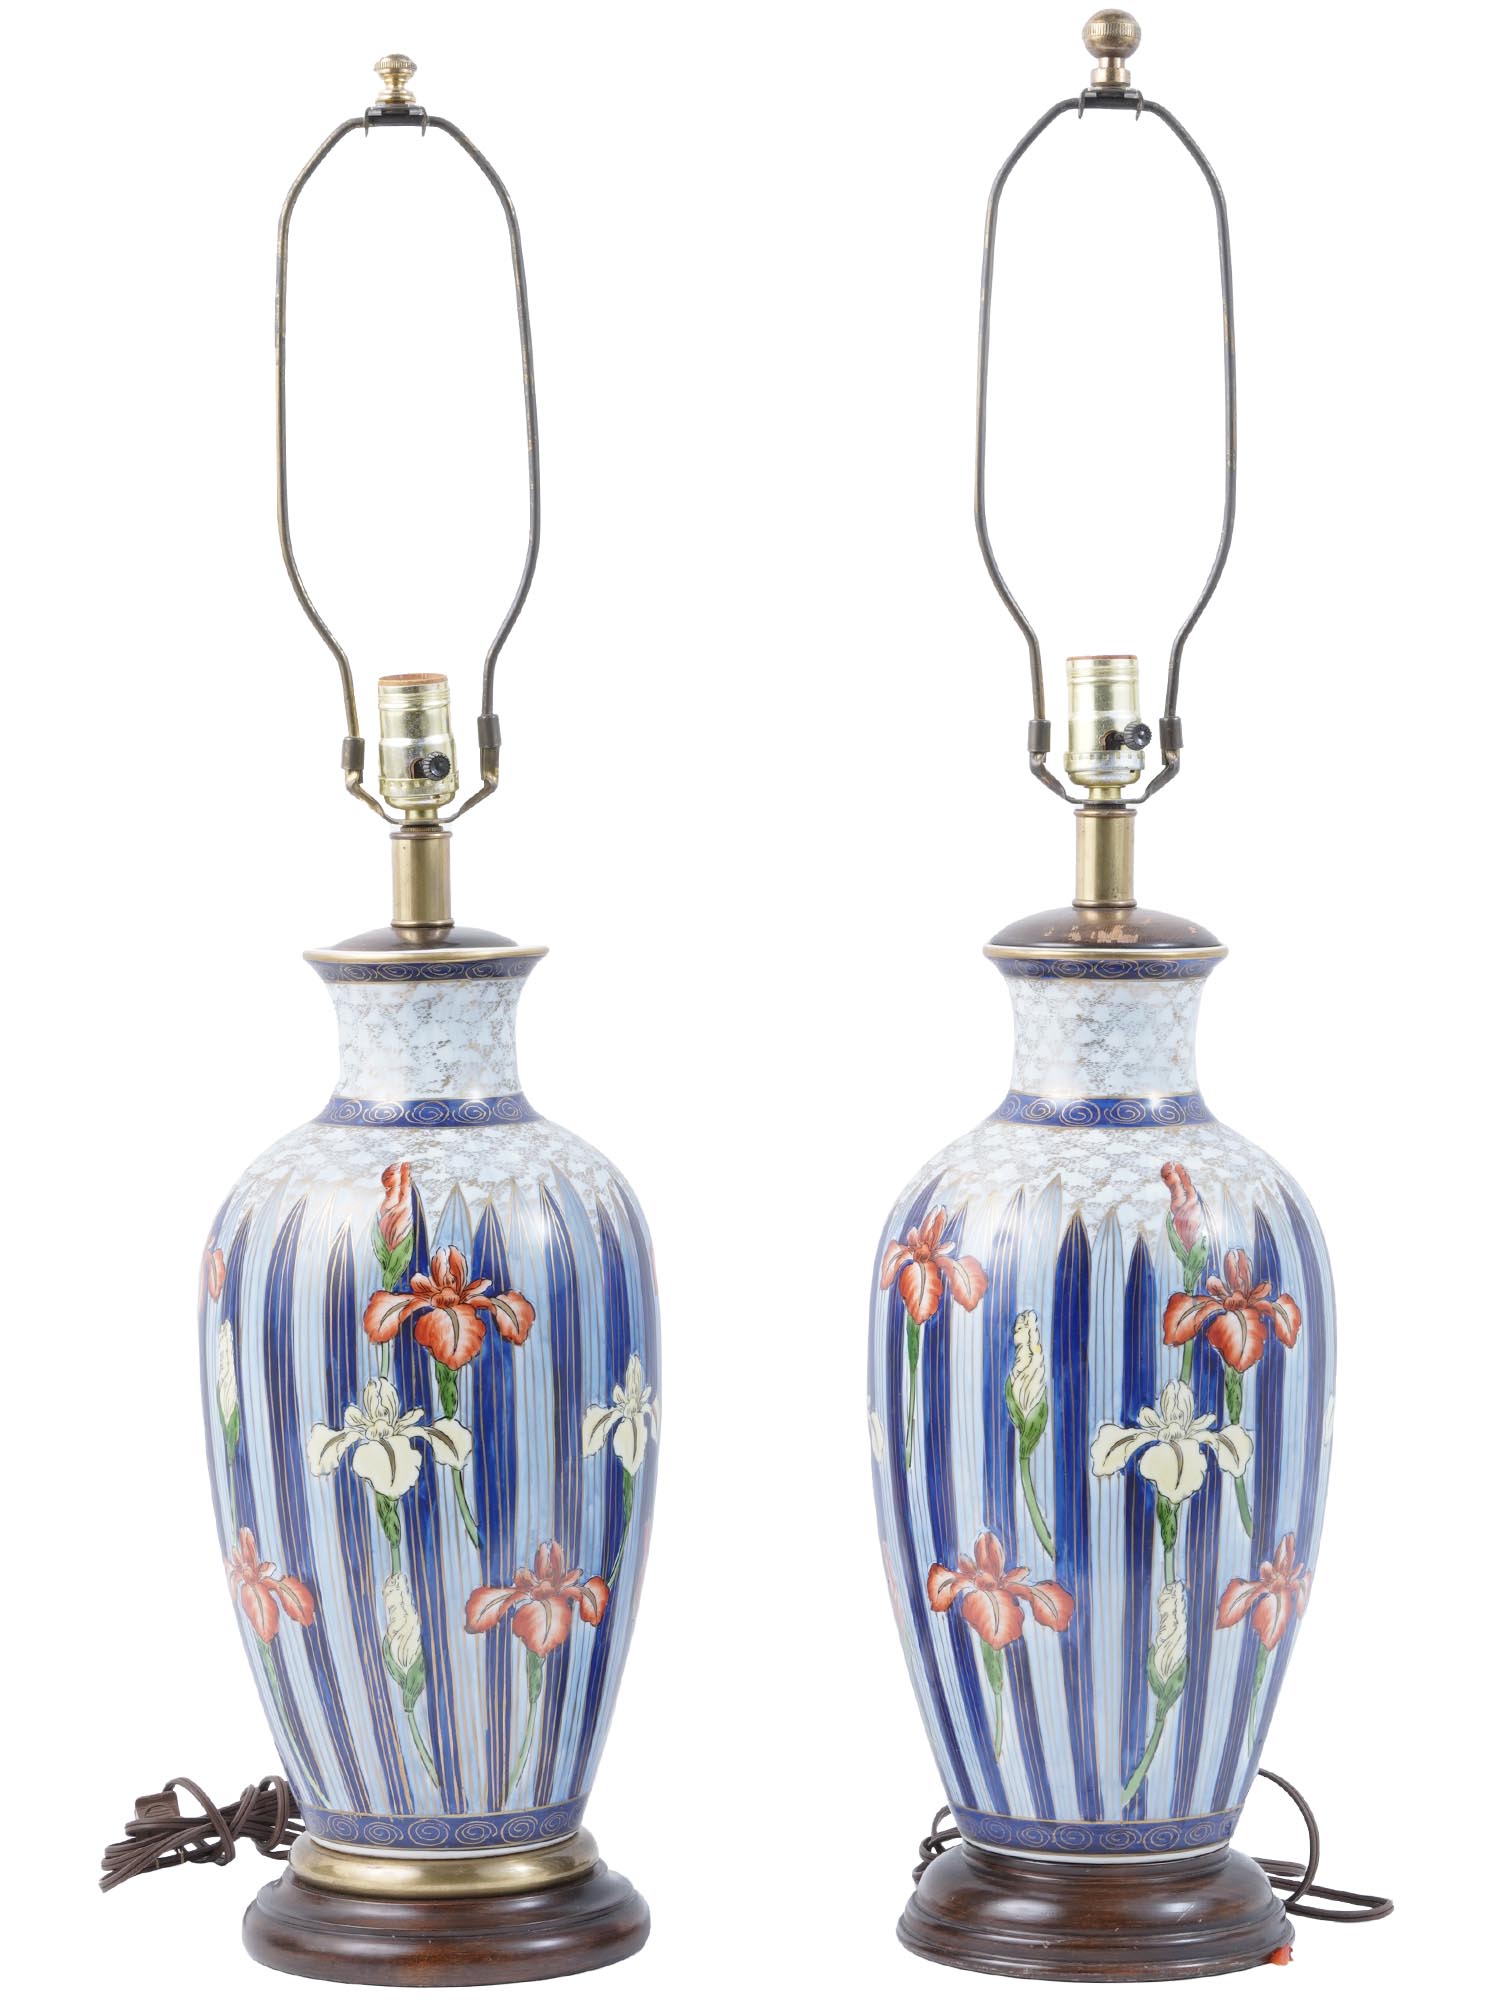 VINTAGE ASIAN PORCELAIN LAMPS WITH IRIS FLOWERS PIC-0